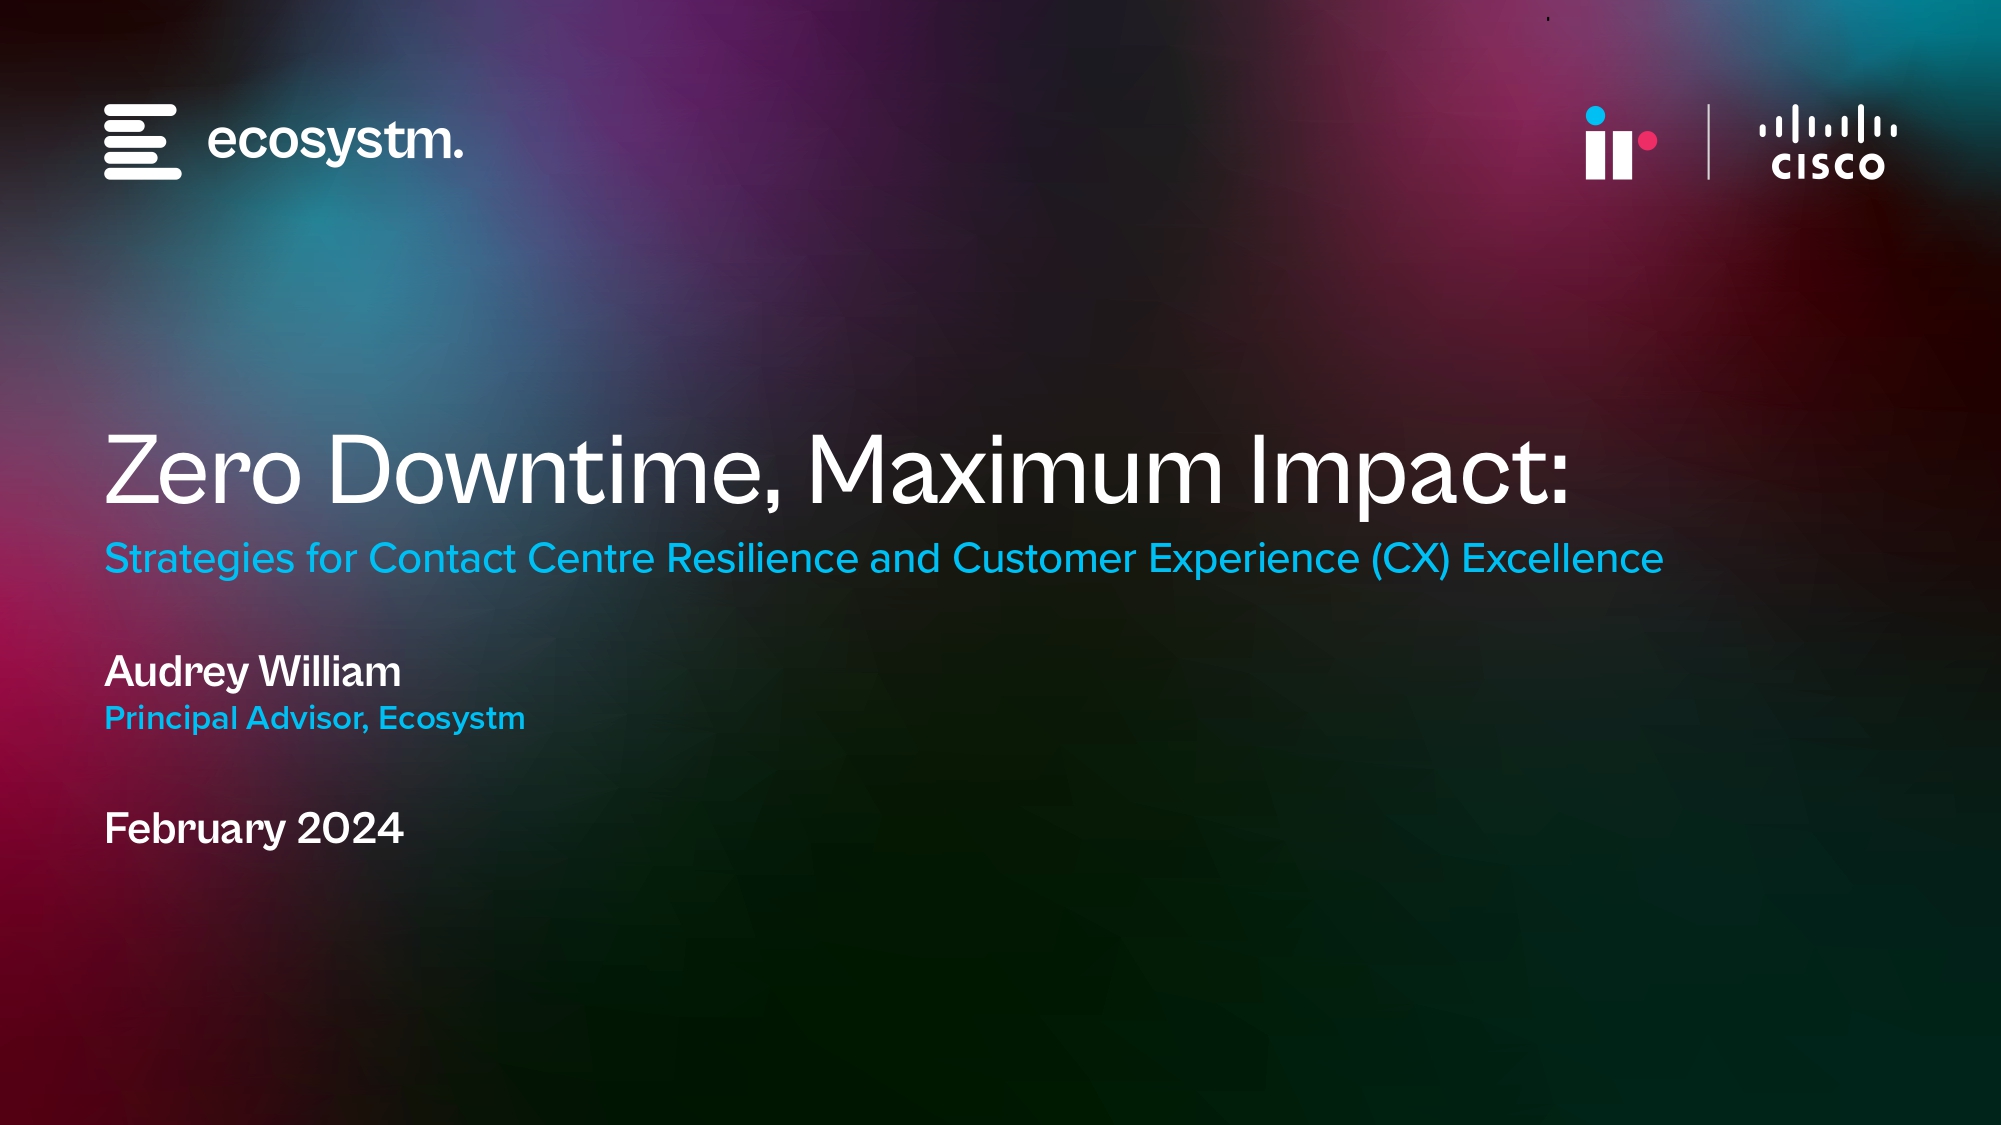 Zero Downtime, Maximum Impact: Strategies for Contact Centre Resilience and Customer Experience (CX) Excellence